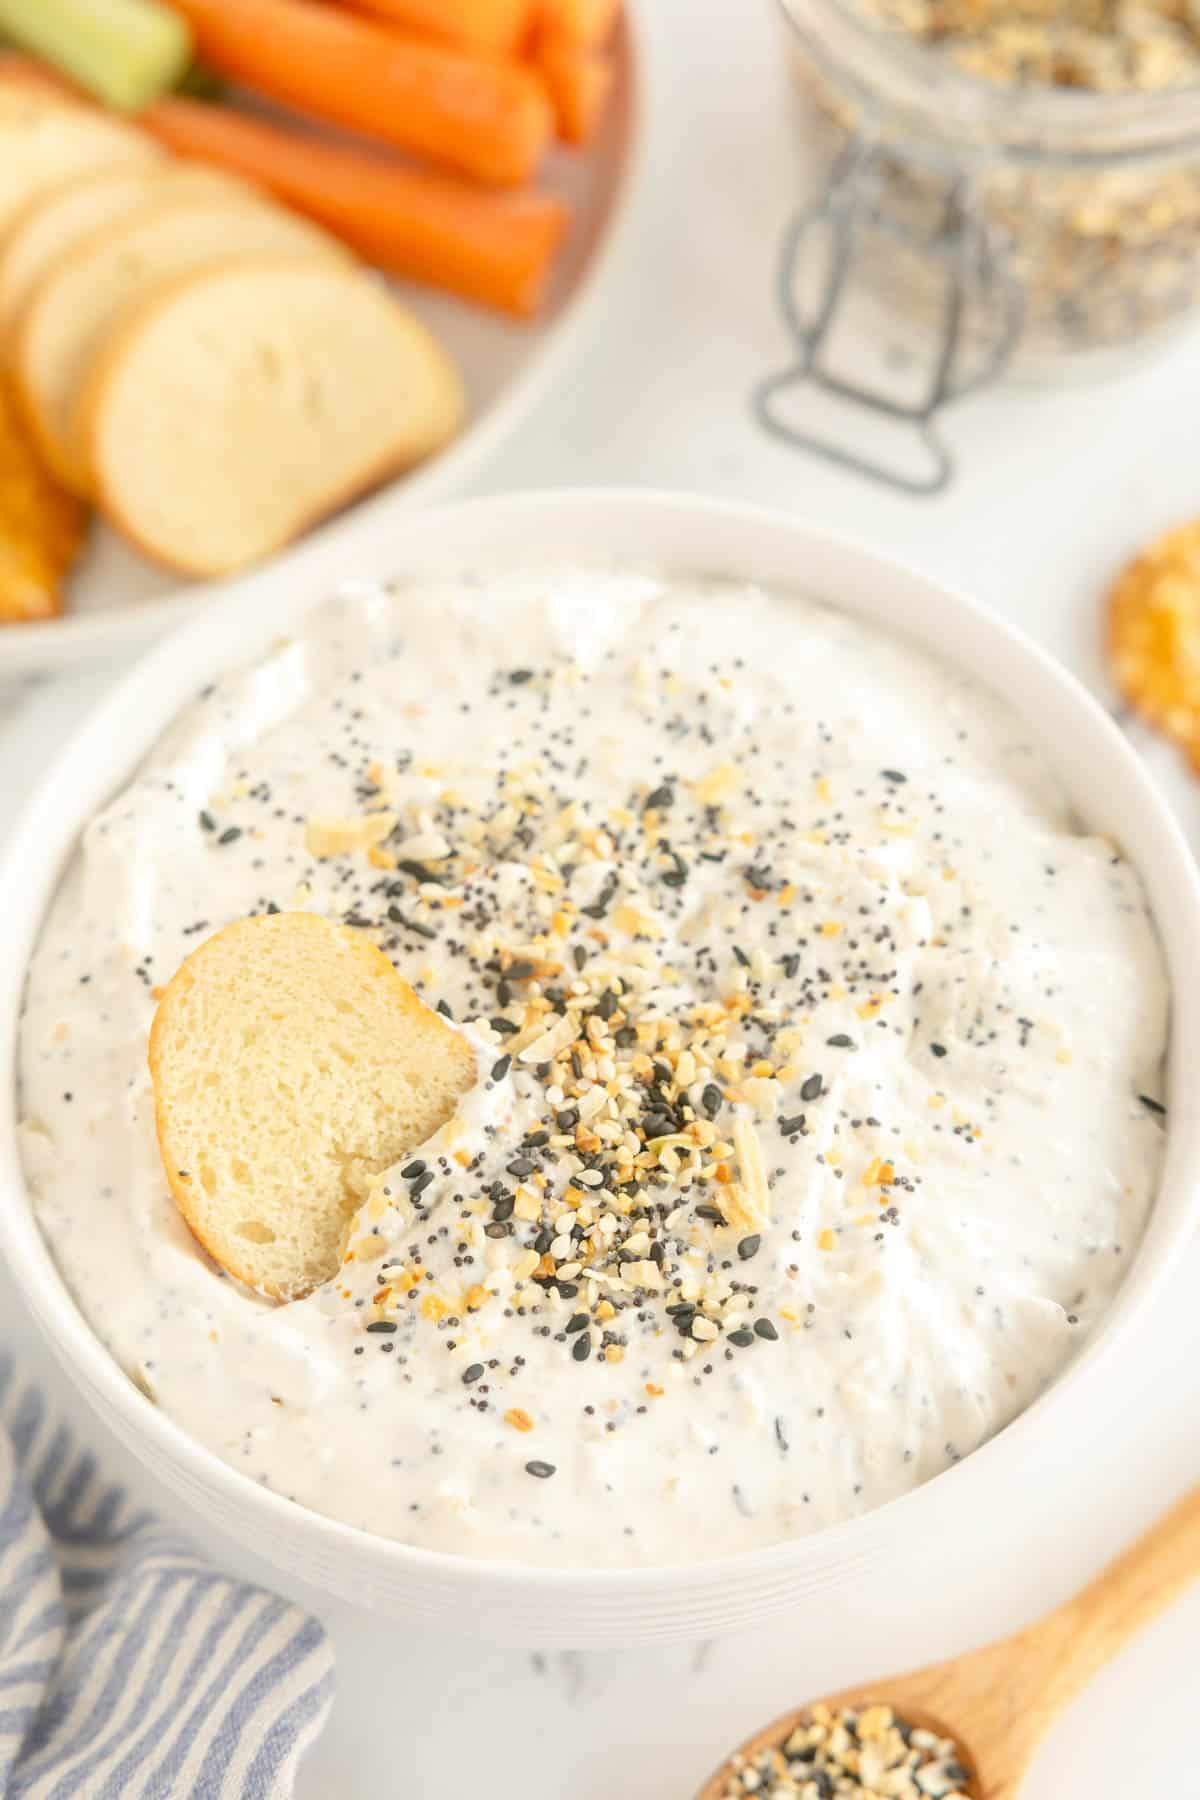 everything bagel dip with a spoon and extra seasoning over the top.